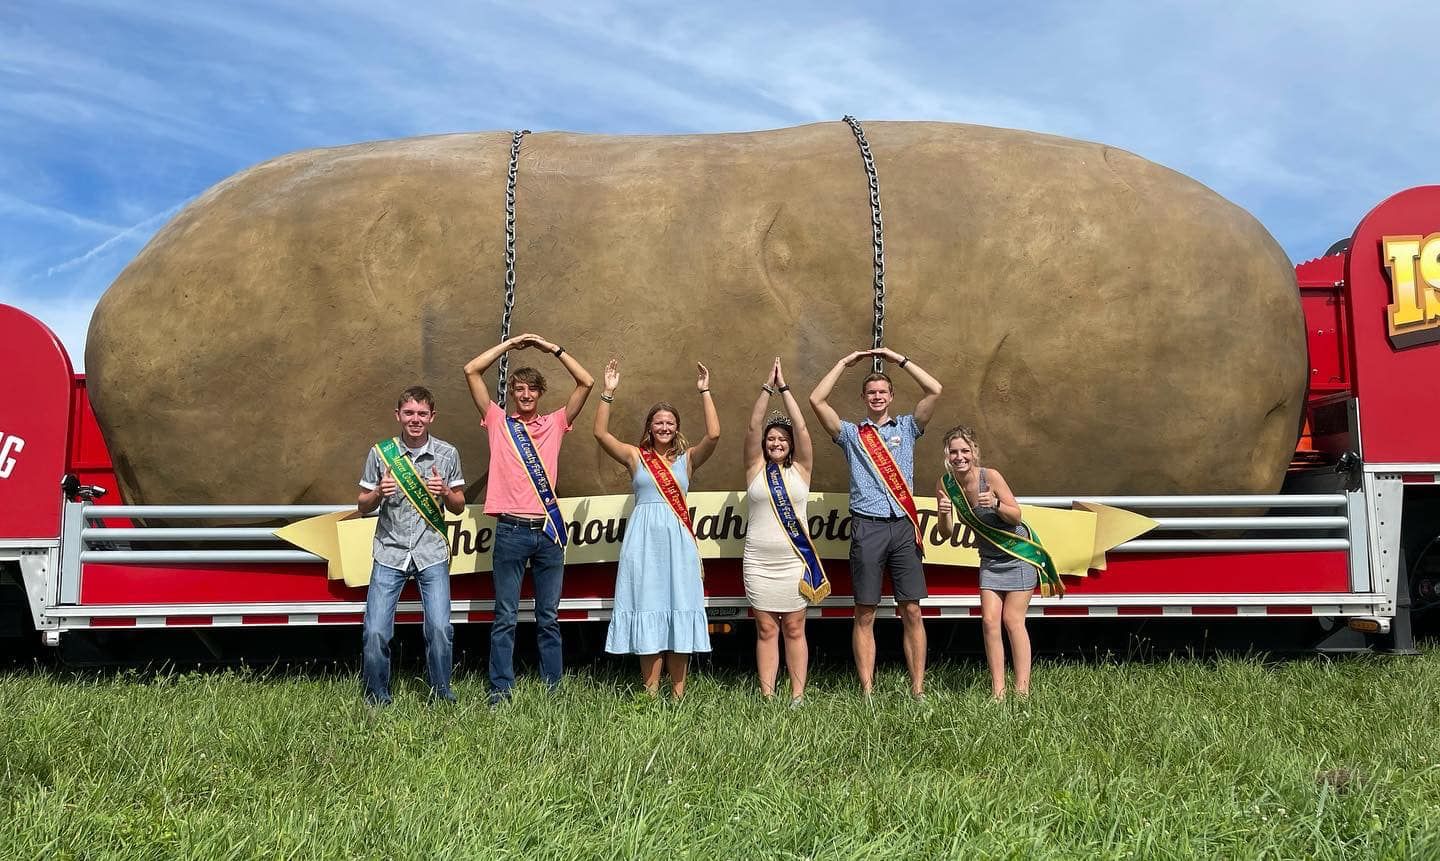 
World's Largest Traveling Potato Sculpture, world record from Idaho